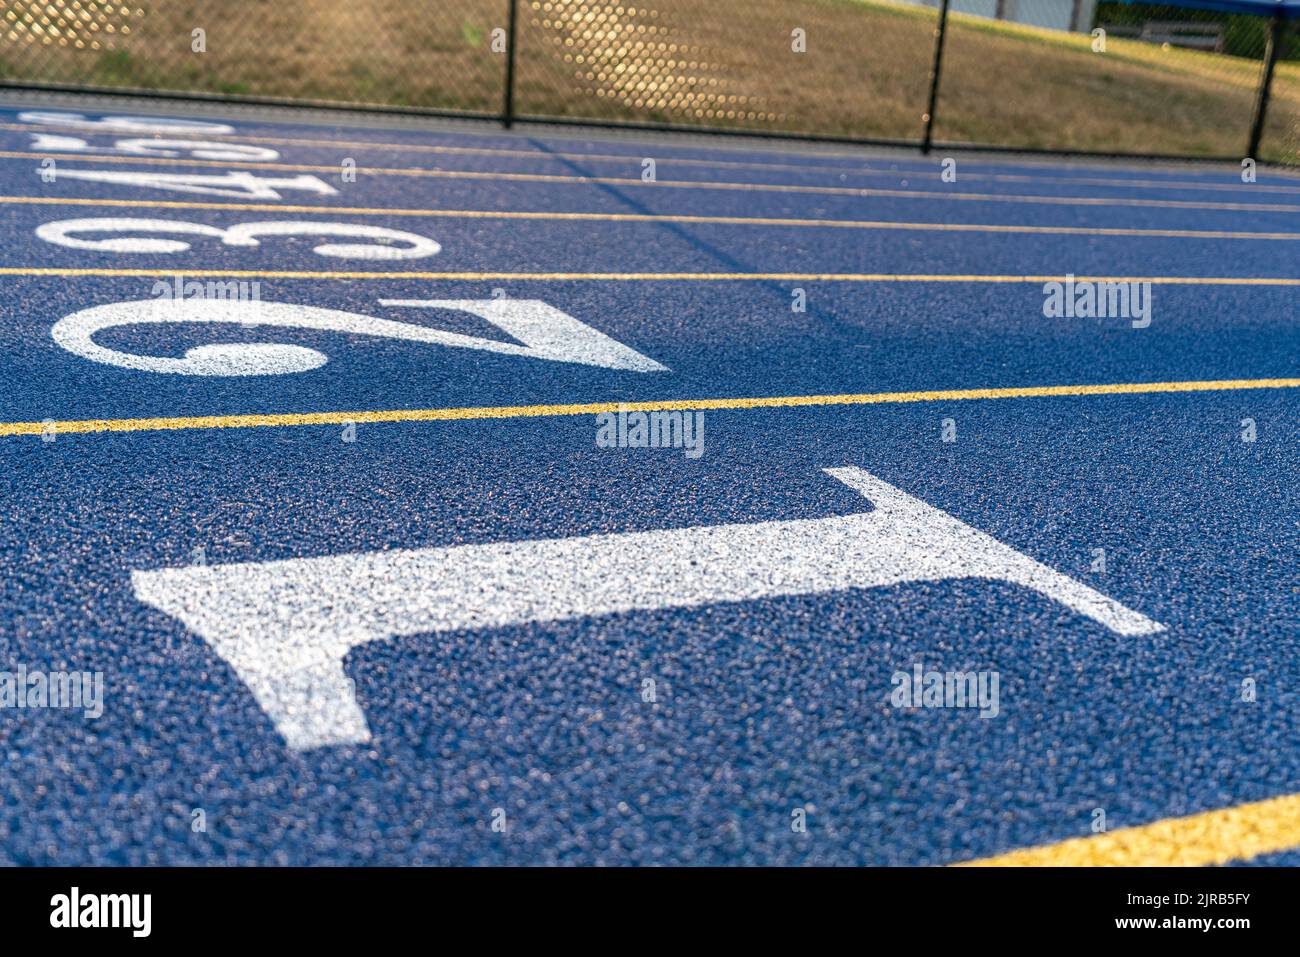 Inspiring close up of a new blue running track with yellow lane lines and other markings. Stock Photo